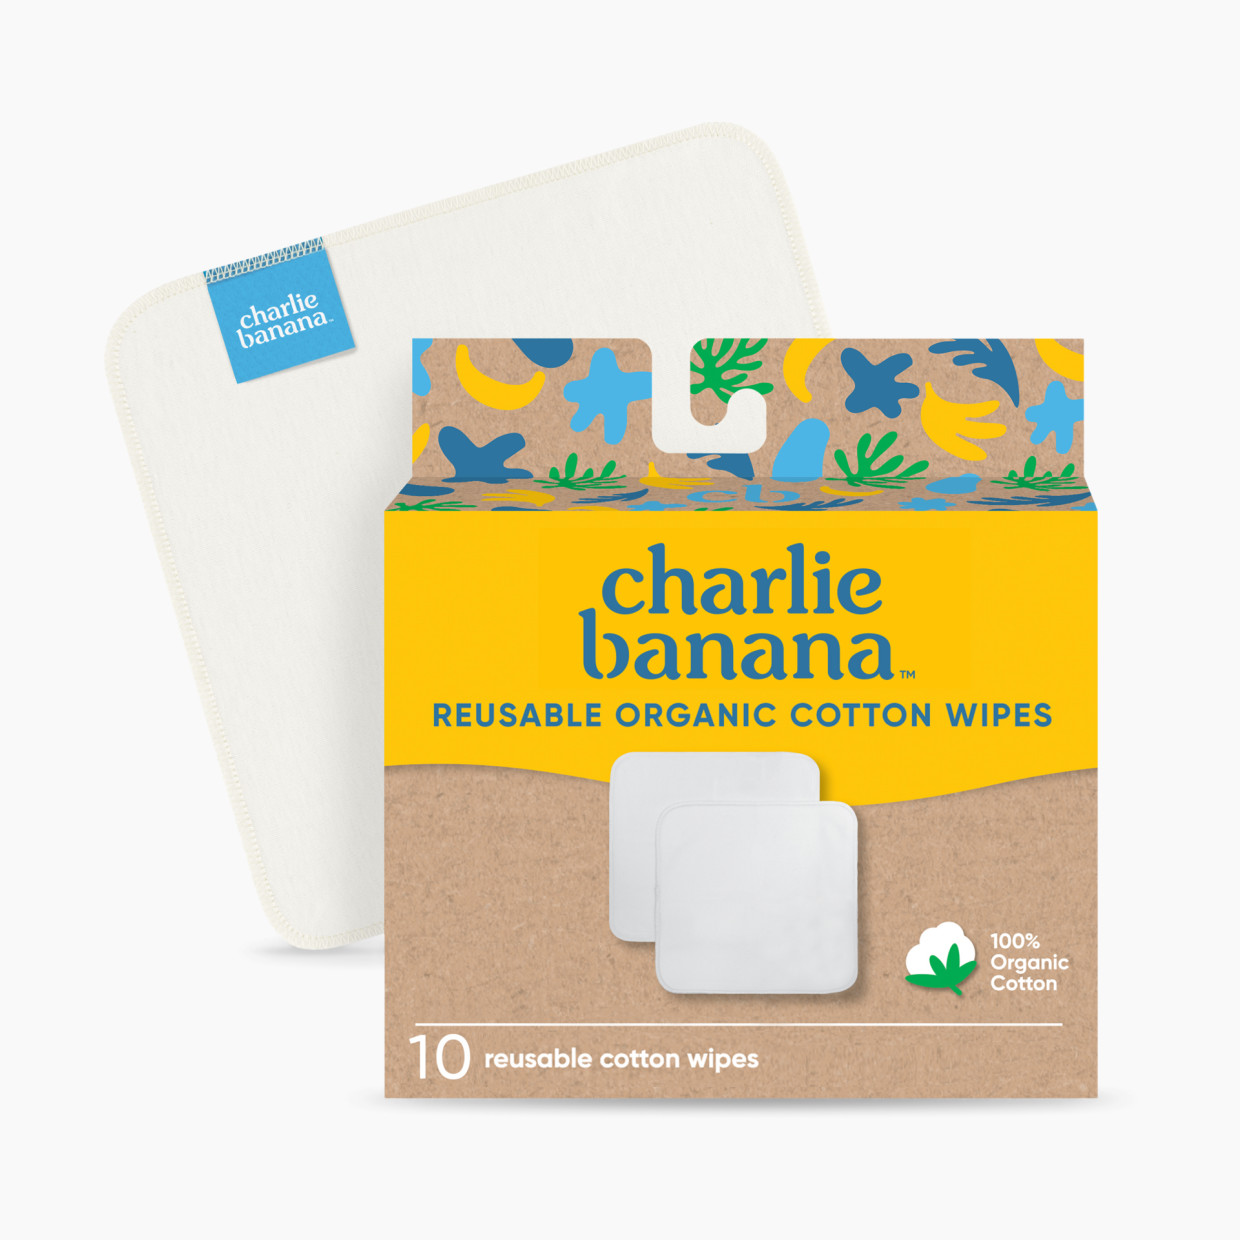 Charlie Banana Reusable & Washable Cotton Wipe (10 Pack) - One Size.